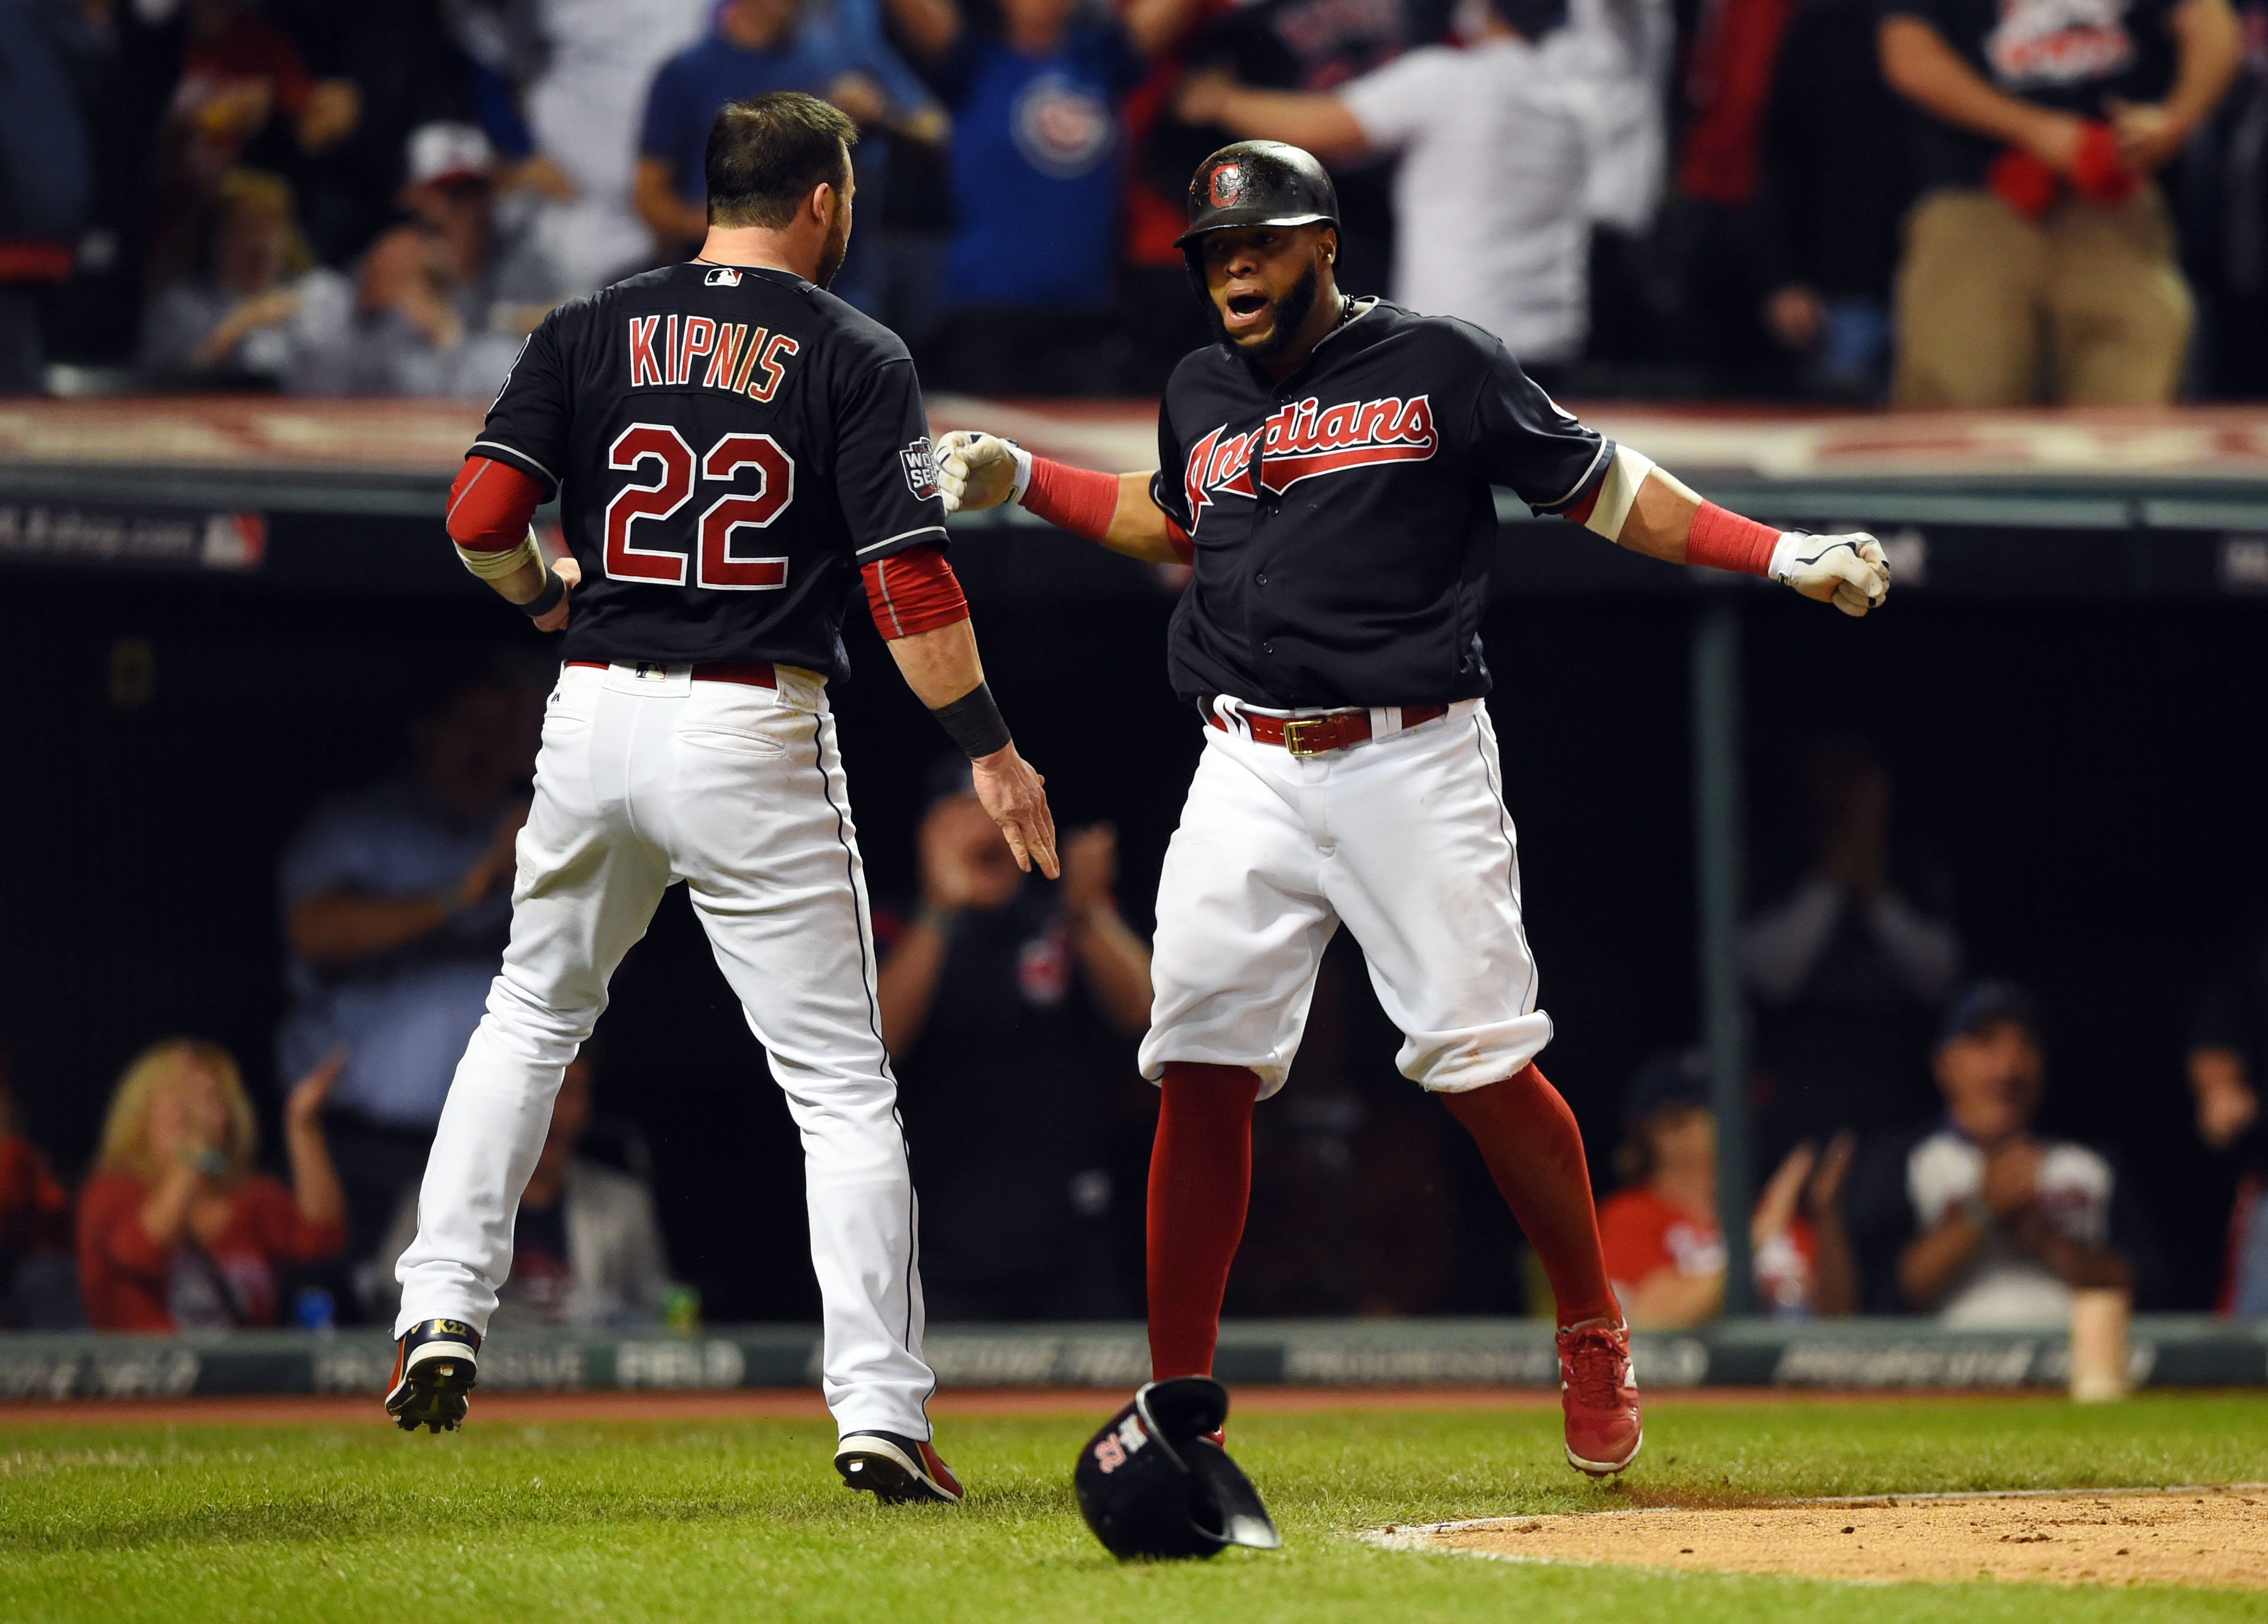 Cleveland Indians must develop chemistry, avoid complacency in